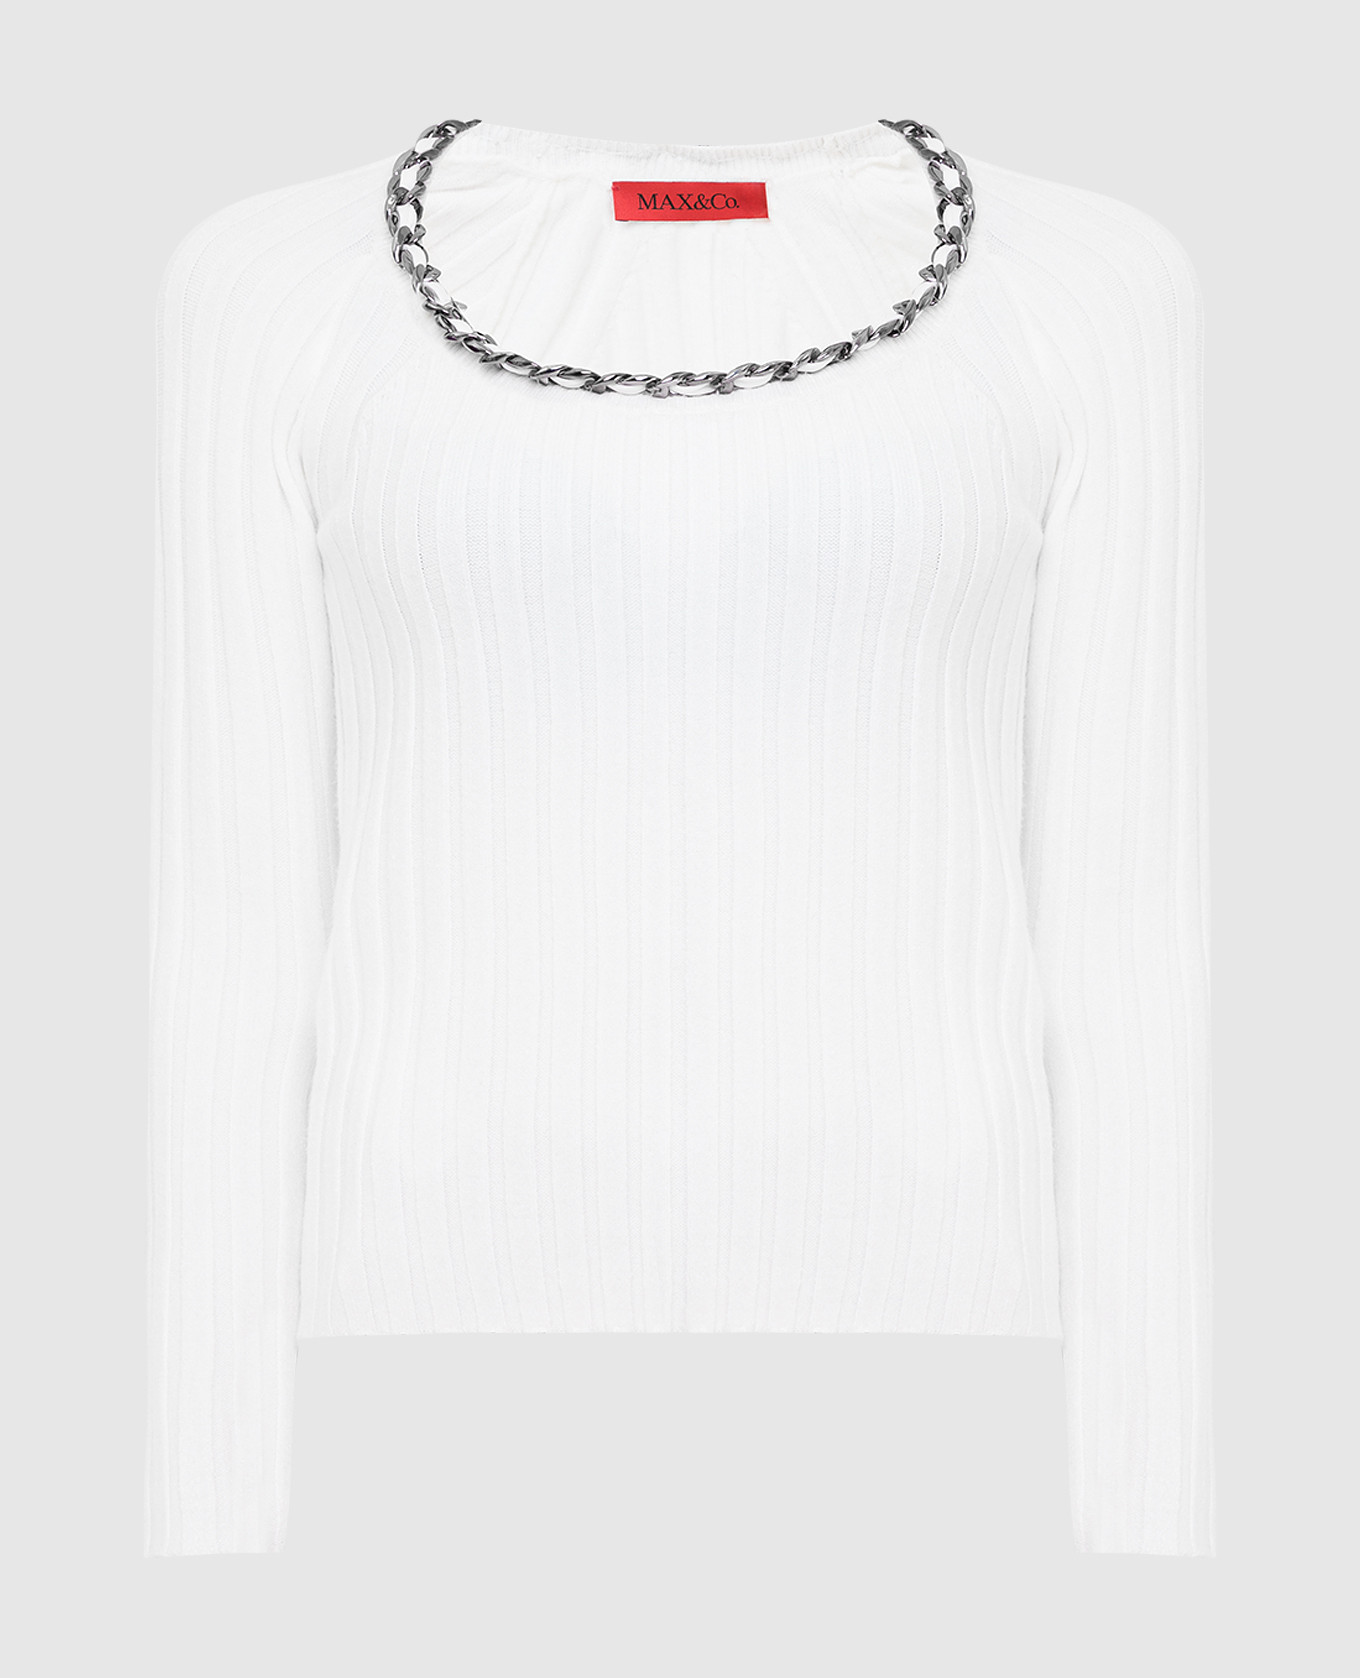 Pablo white jumper with chain